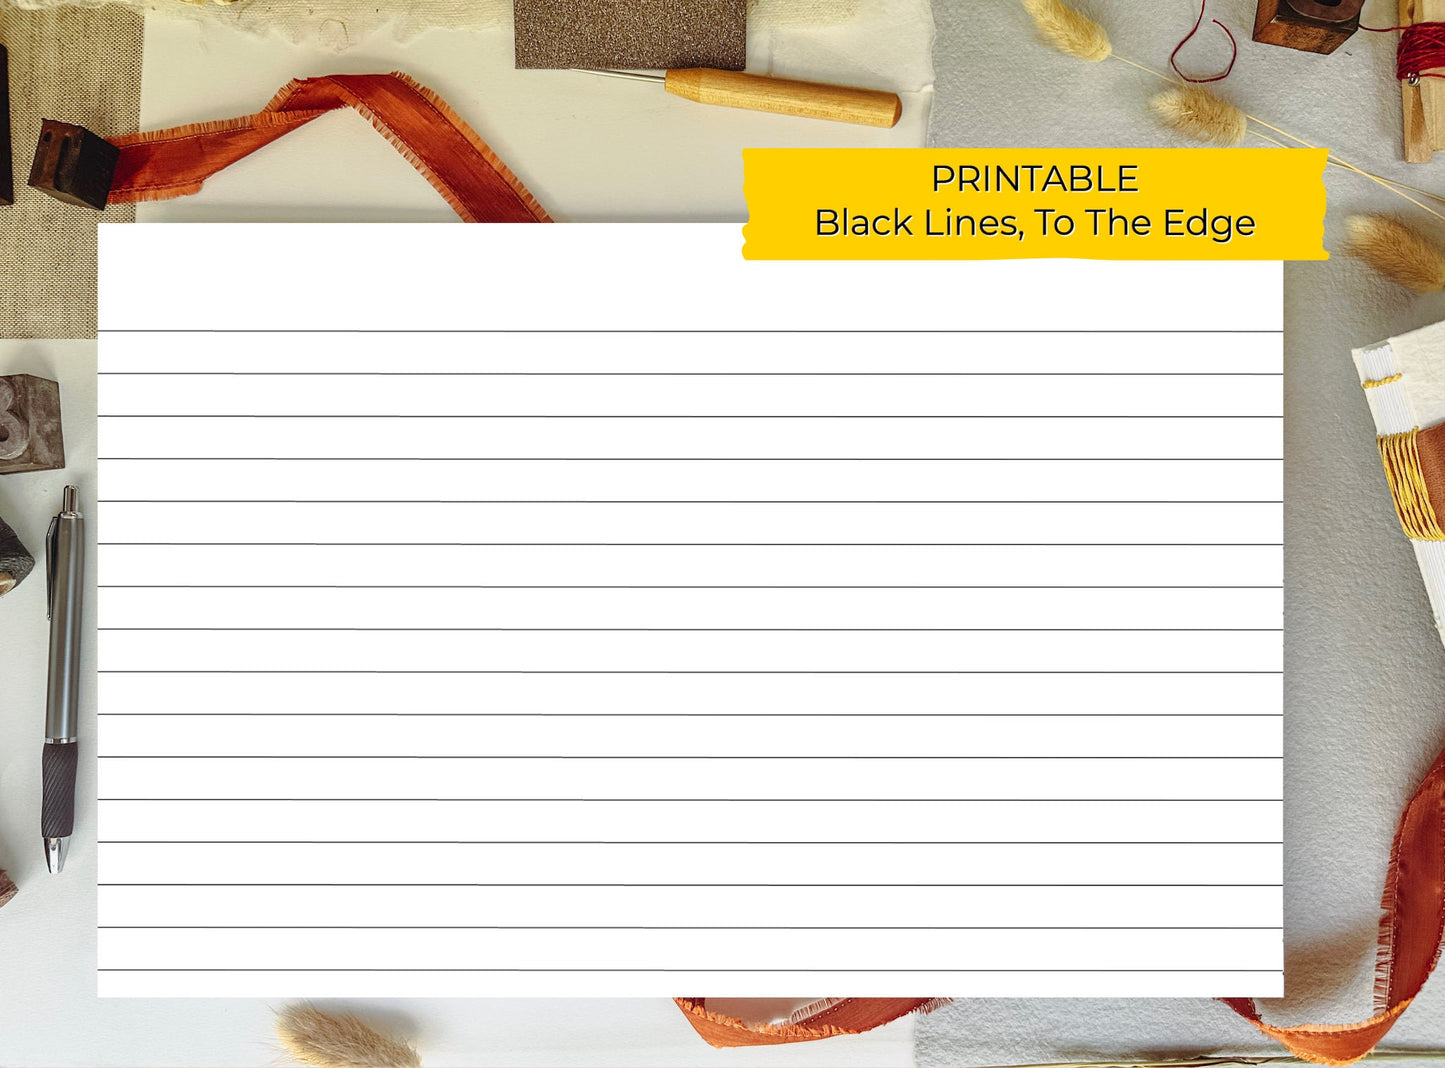 11 x 17 To Edge LINED/RULED PRINTABLE Digital Book Binding Signature File - Black Lines